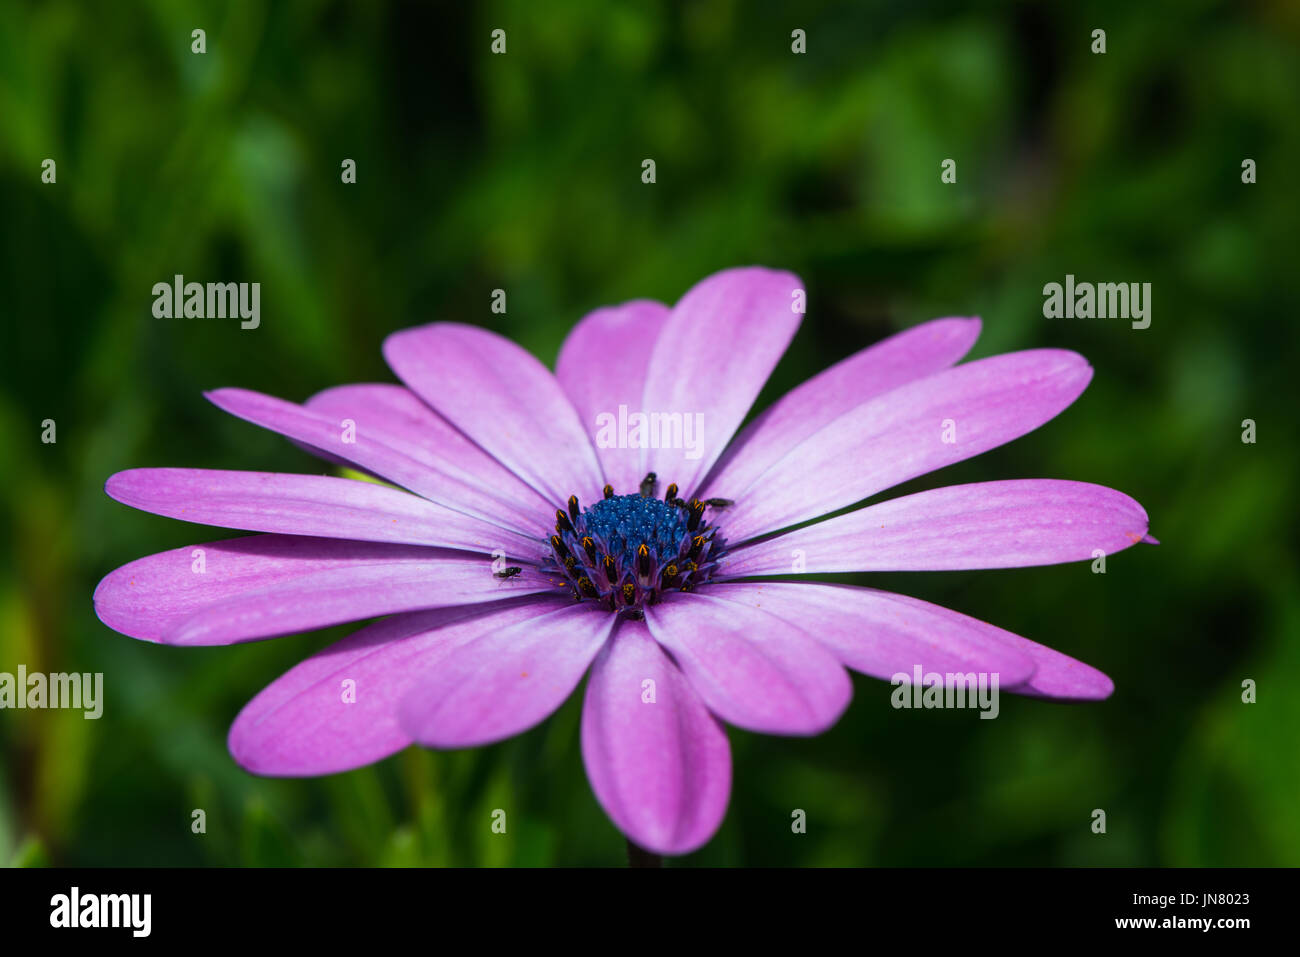 Close-up of a single pink summer flower in an English garden. with shallow depth of field. Stock Photo